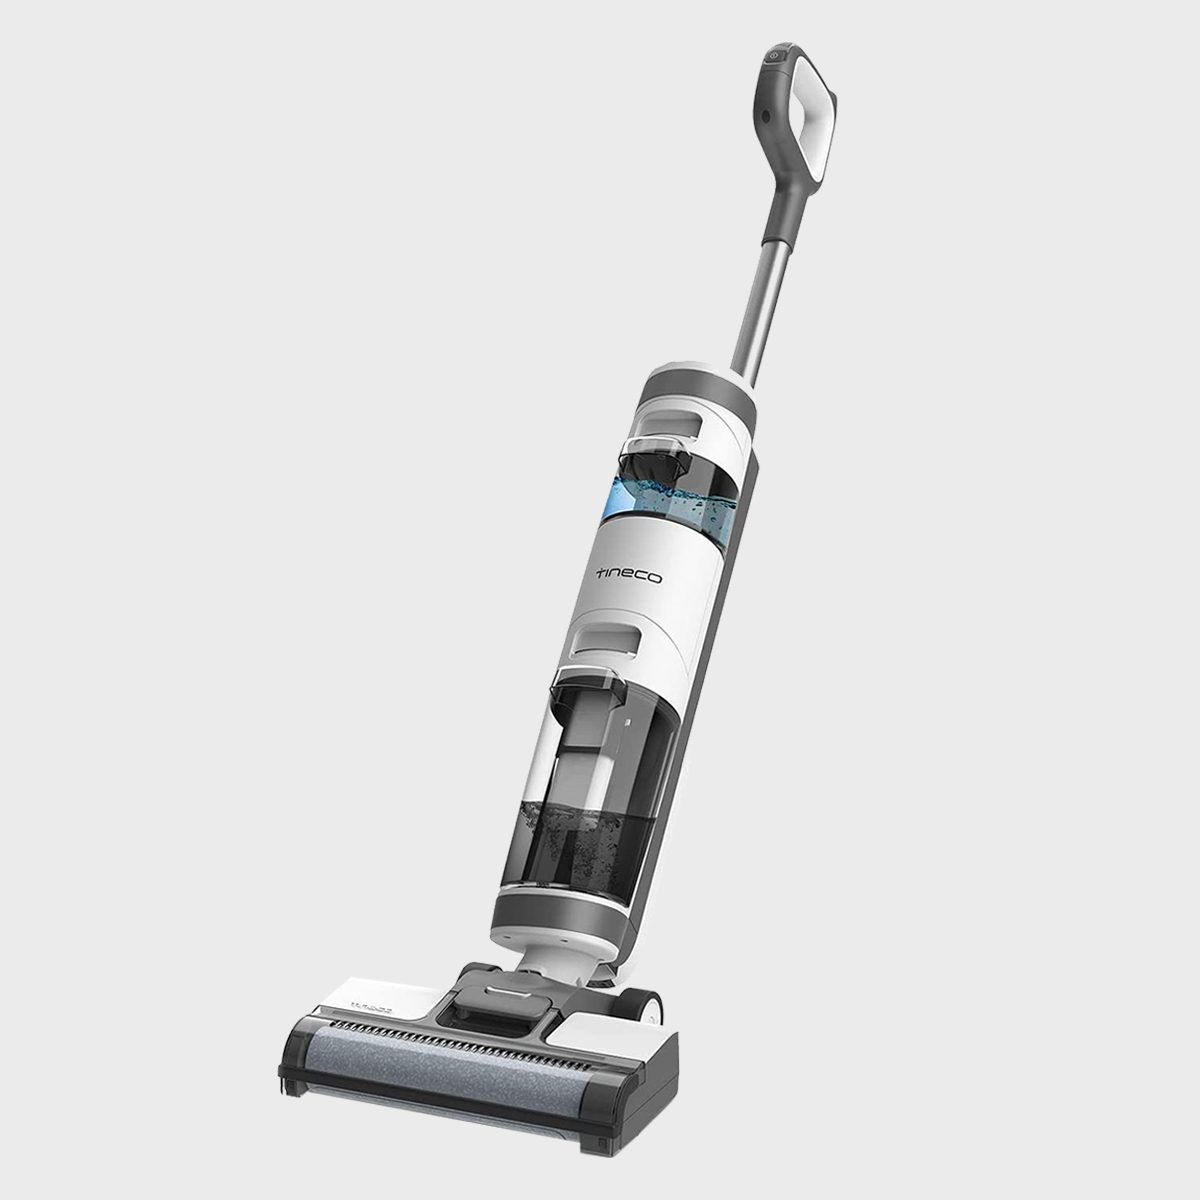 The Tineco S3 Wet and Dry Vacuum Cleaner is the perfect way to keep your  home clean on a daily basis